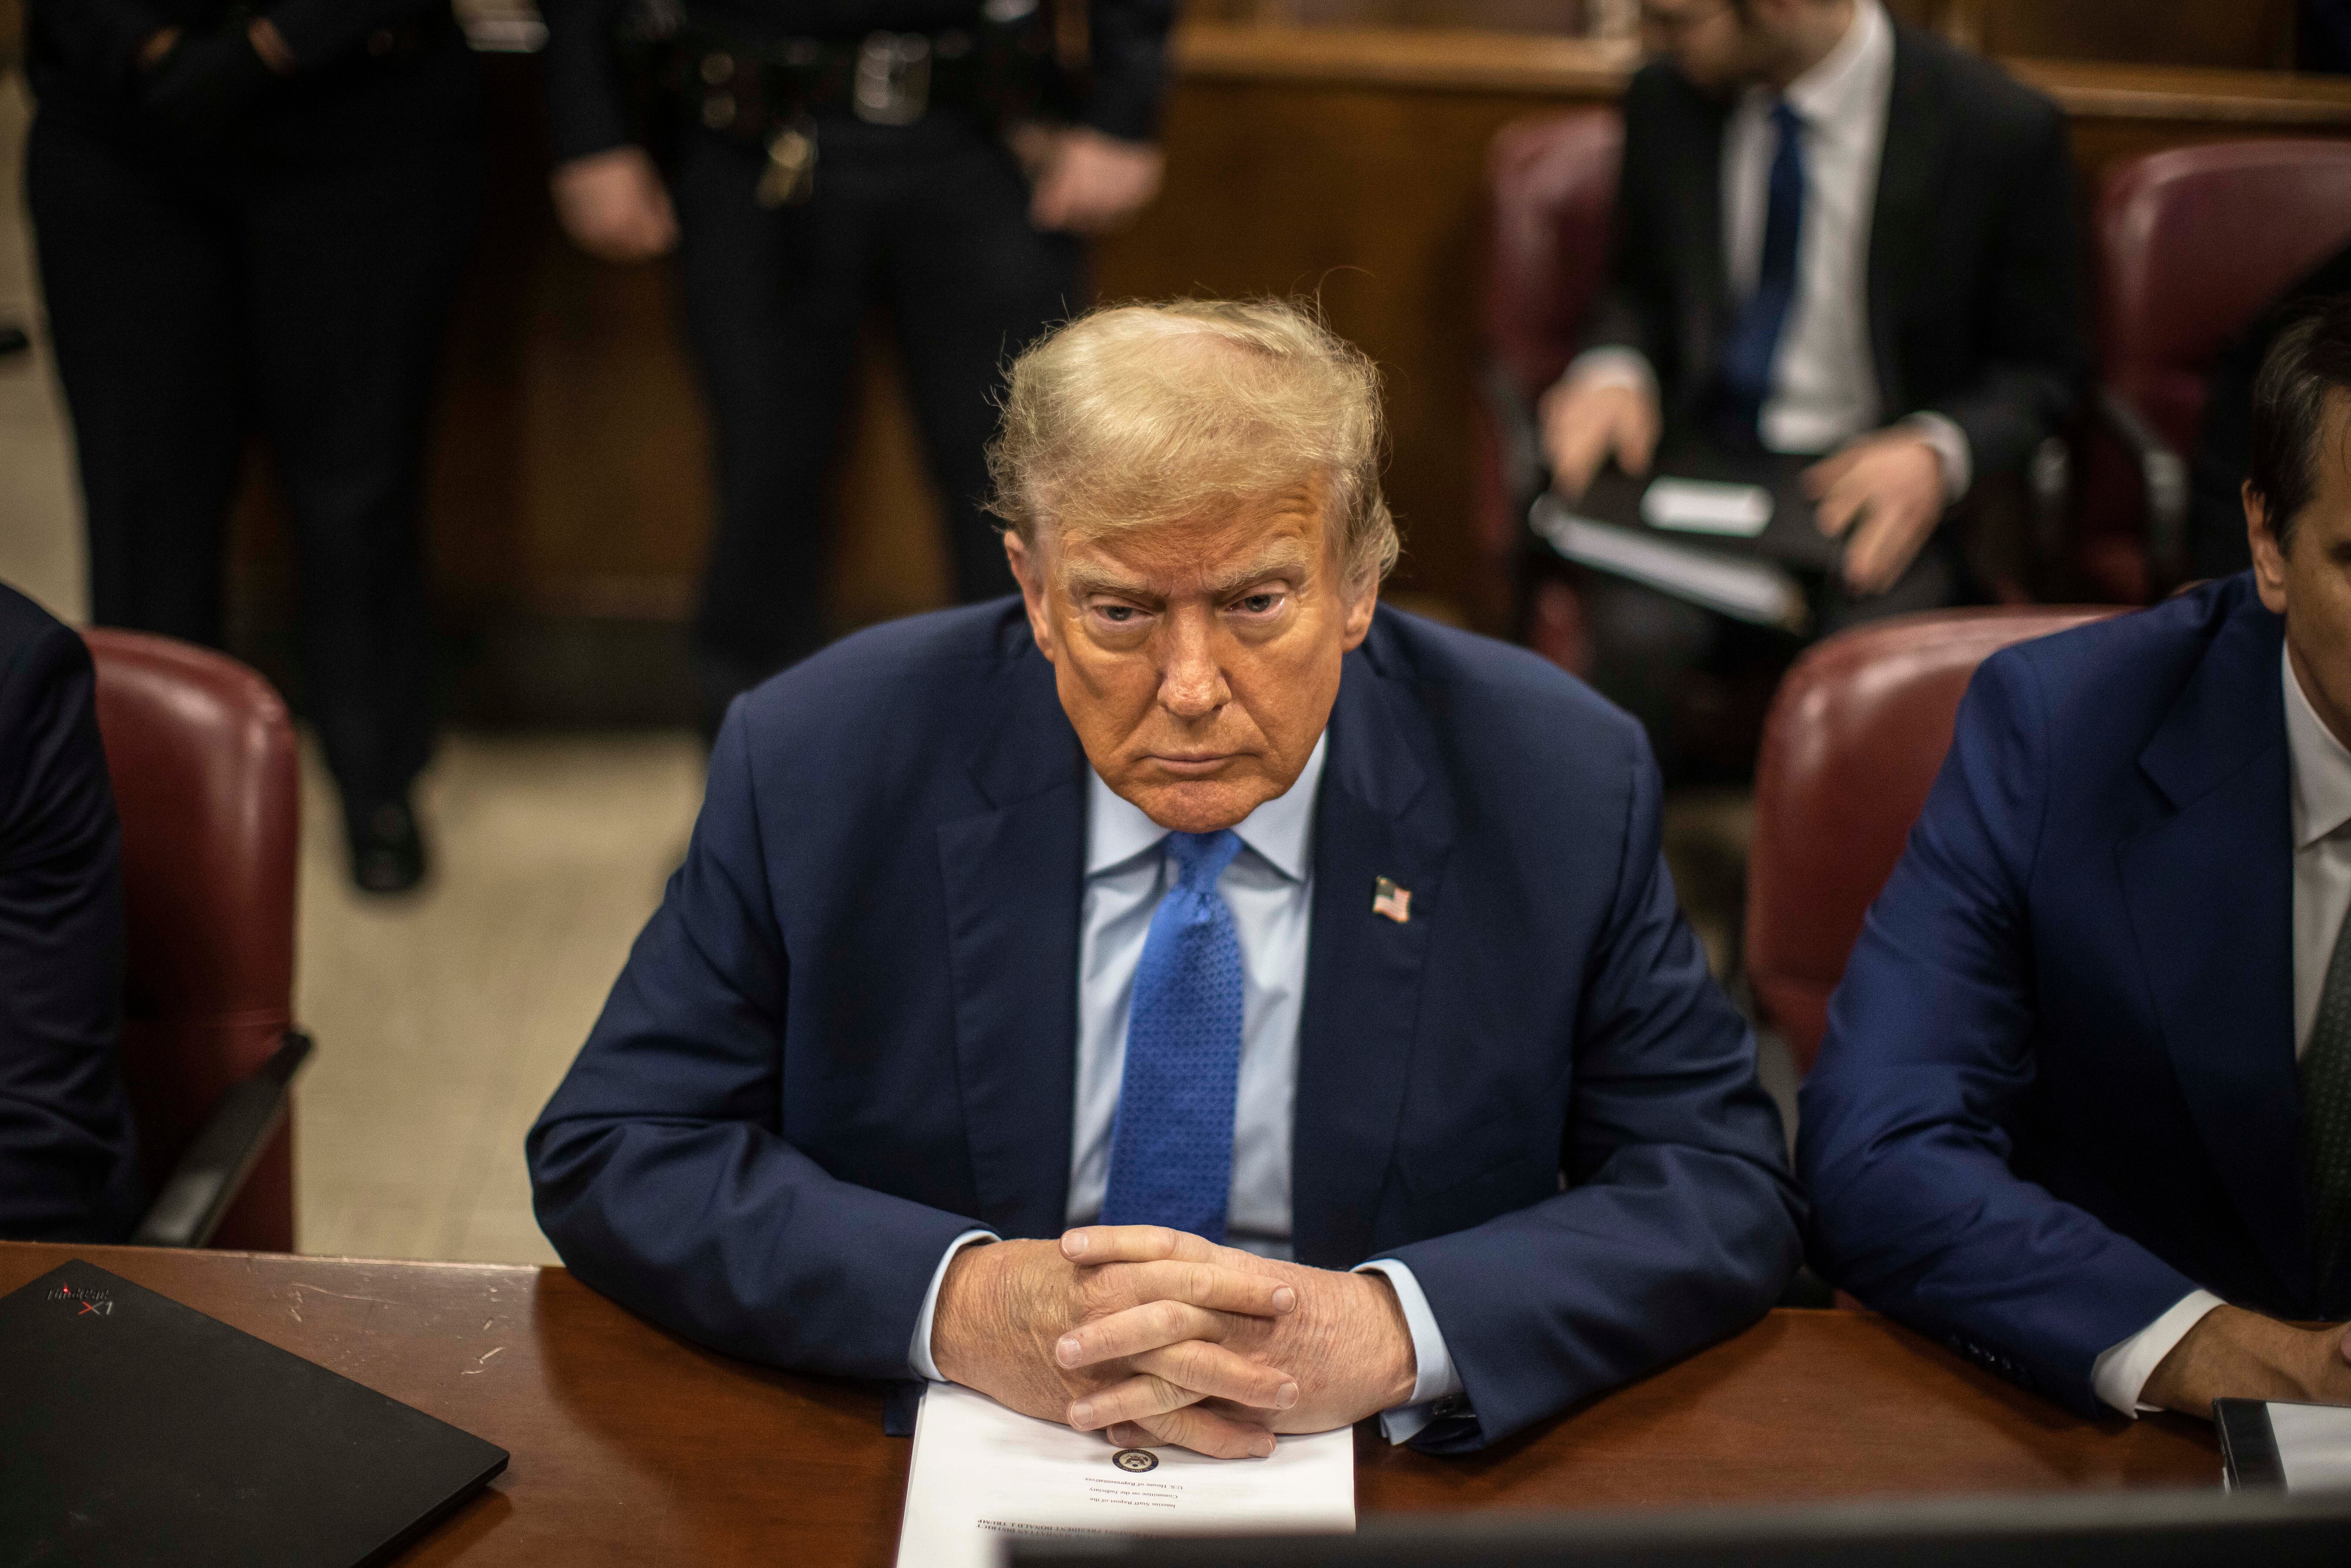 Mr Trump at the Manhattan criminal courthouse on 26 April 2024. He has pleaded not guilty and has denied any wrongdoing in the hush money case, the first-ever criminal trial of a US president